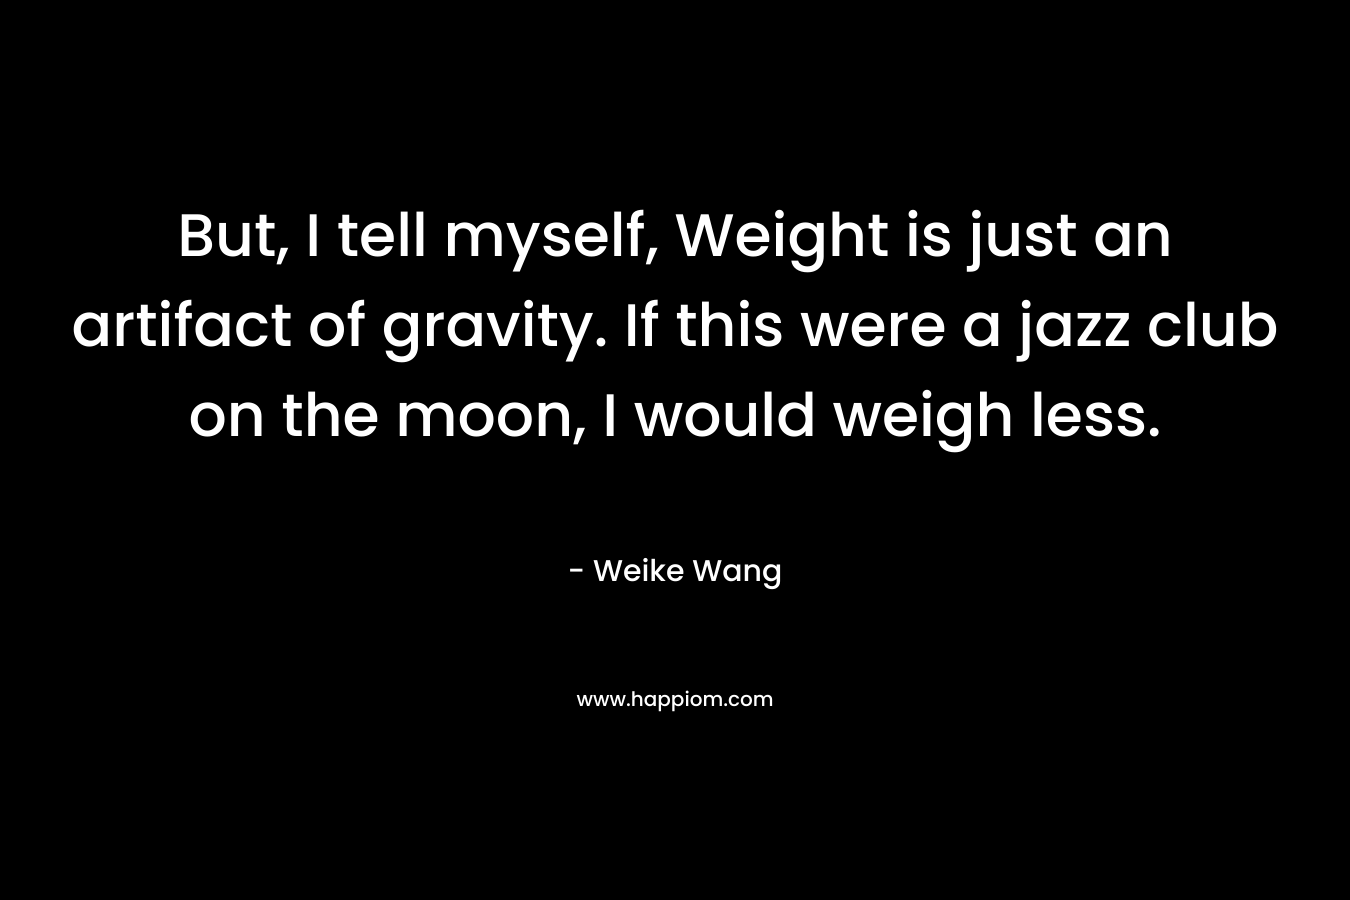 But, I tell myself, Weight is just an artifact of gravity. If this were a jazz club on the moon, I would weigh less.